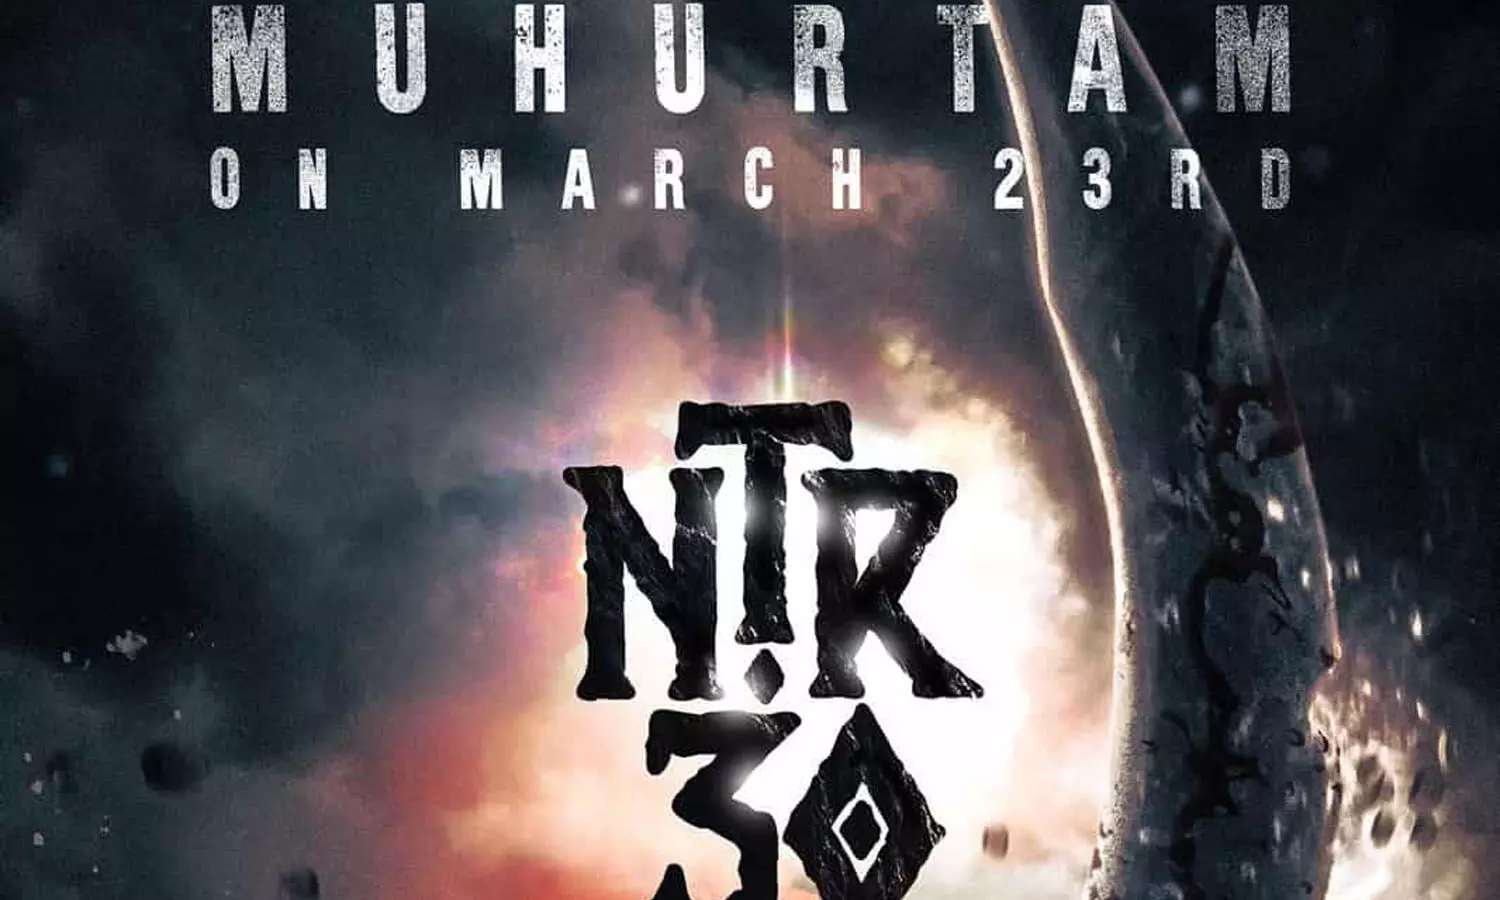 NTR30 with Koratala Siva to have muhurtham on March 30th